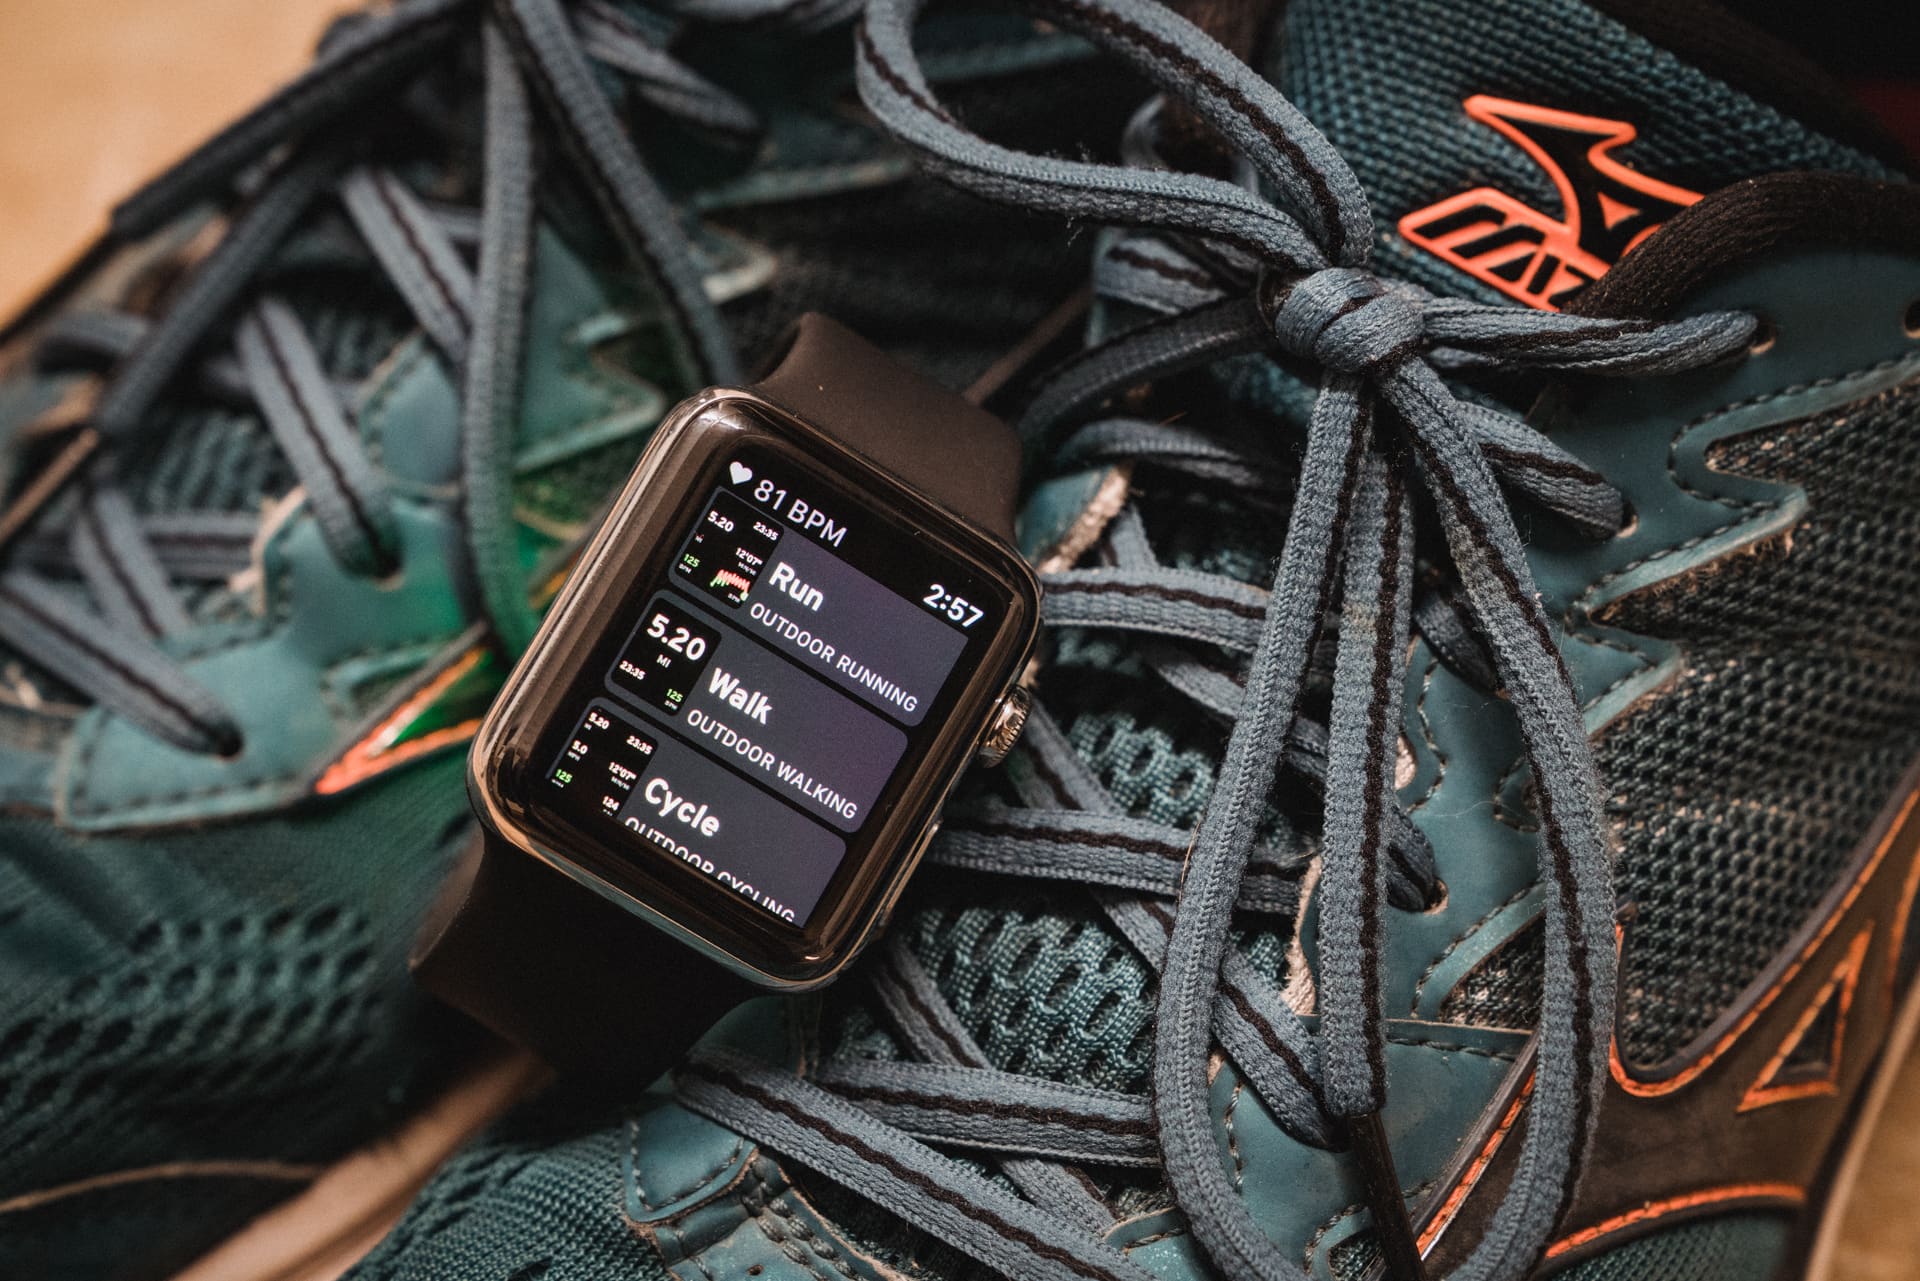 The best stand-alone fitness app for Apple Watch